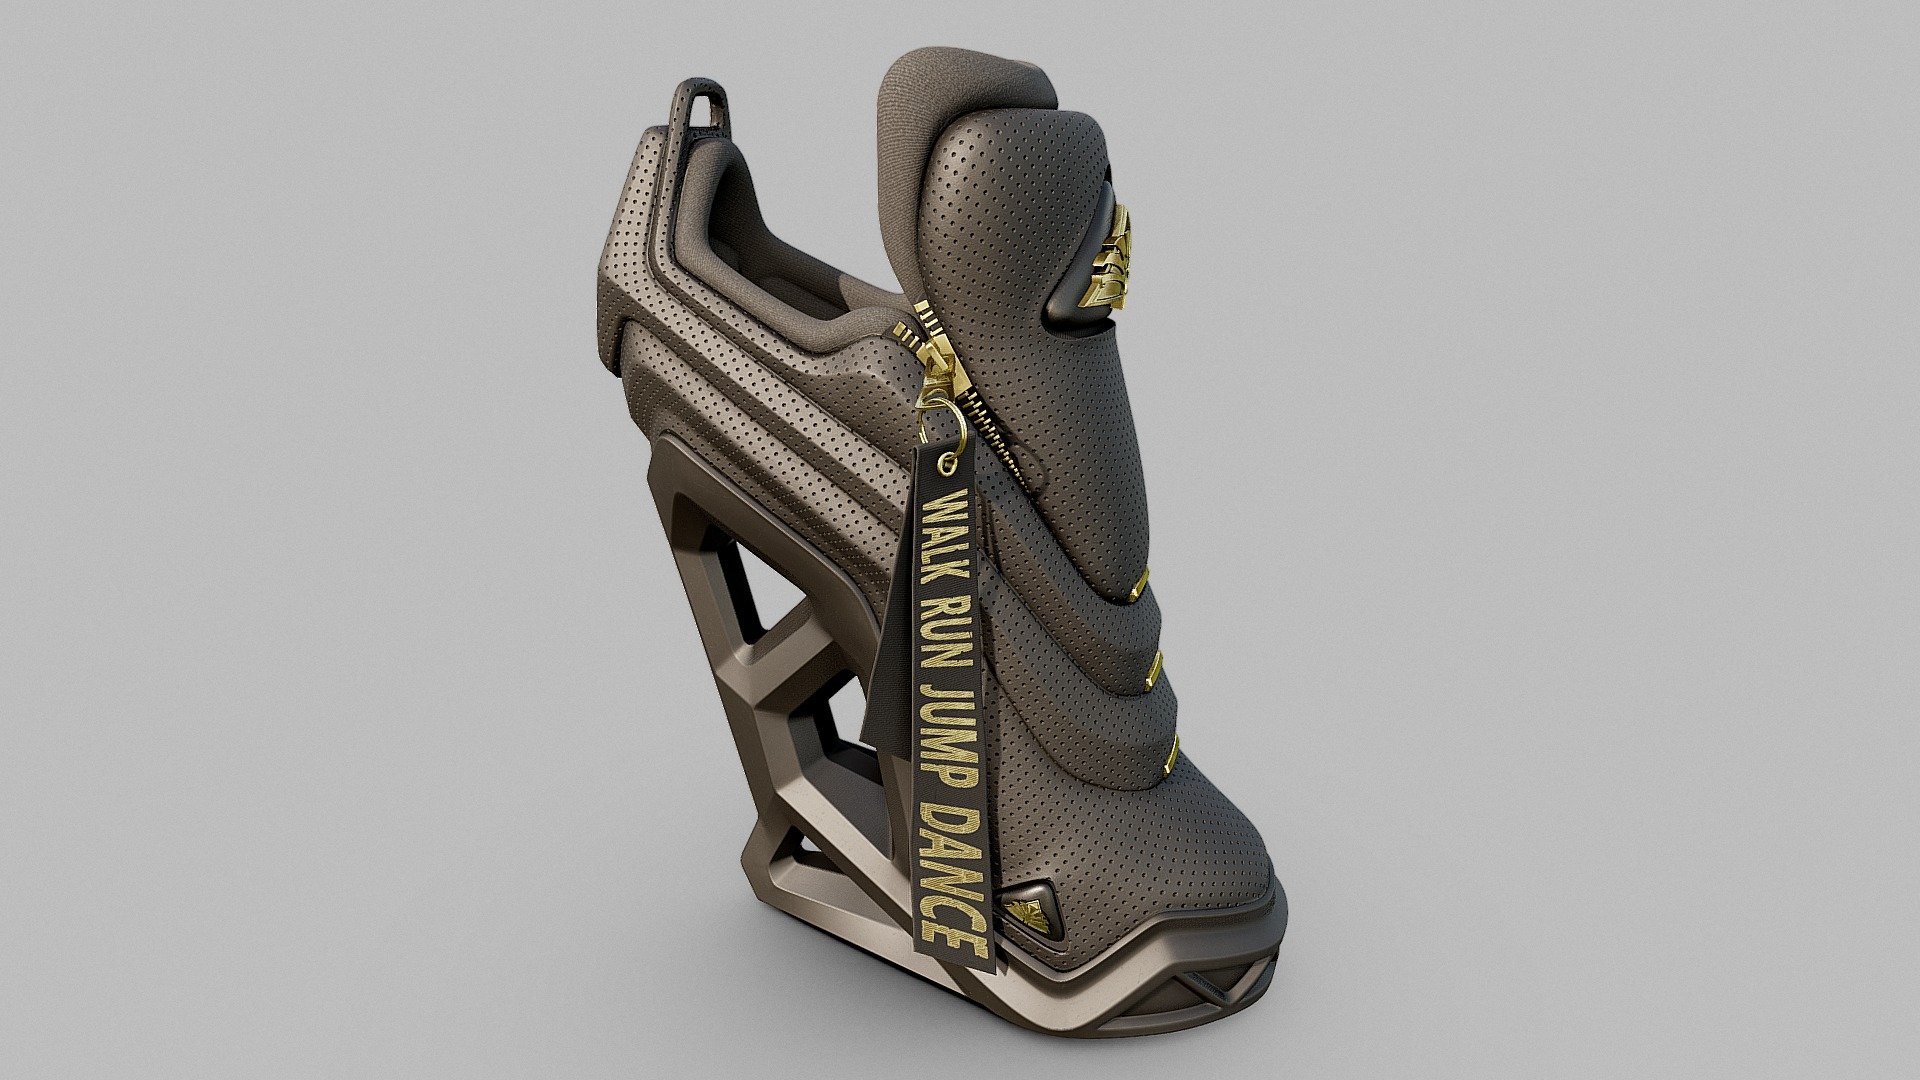 Take your virtual projects to the next level with the Comfy Heel. This model is perfect for character creation, visualization, and a variety of other purposes. The boot was designed and sculpted with ZBrush and textured with Substance Painter for a realistic look and feel. The design exudes innovation and luxury, radiating an air of confidence and sophistication in street wear! Pumping the boot with a pump on the front will inflate air cushions around the feet, providing an unparalleled level of comfort. Thanks to a special sole, the platform provides a one-of-a-kind walking experience by reducing the sound of each step to the whisper of a falling feather! And the special sensors will gather all the necessary data to optimize your wellness experience.

Unreal Engine 5.1.1 scene with materials, textures, and a mirrored pair of heels included!

See the versions:
(BLK) https://skfb.ly/oDIHz
(CAMO) https://skfb.ly/oE77n - Comfy Heel (BLK&GLD) - Buy Royalty Free 3D model by Bartholomew Koziel (@bkoziel) 3d model